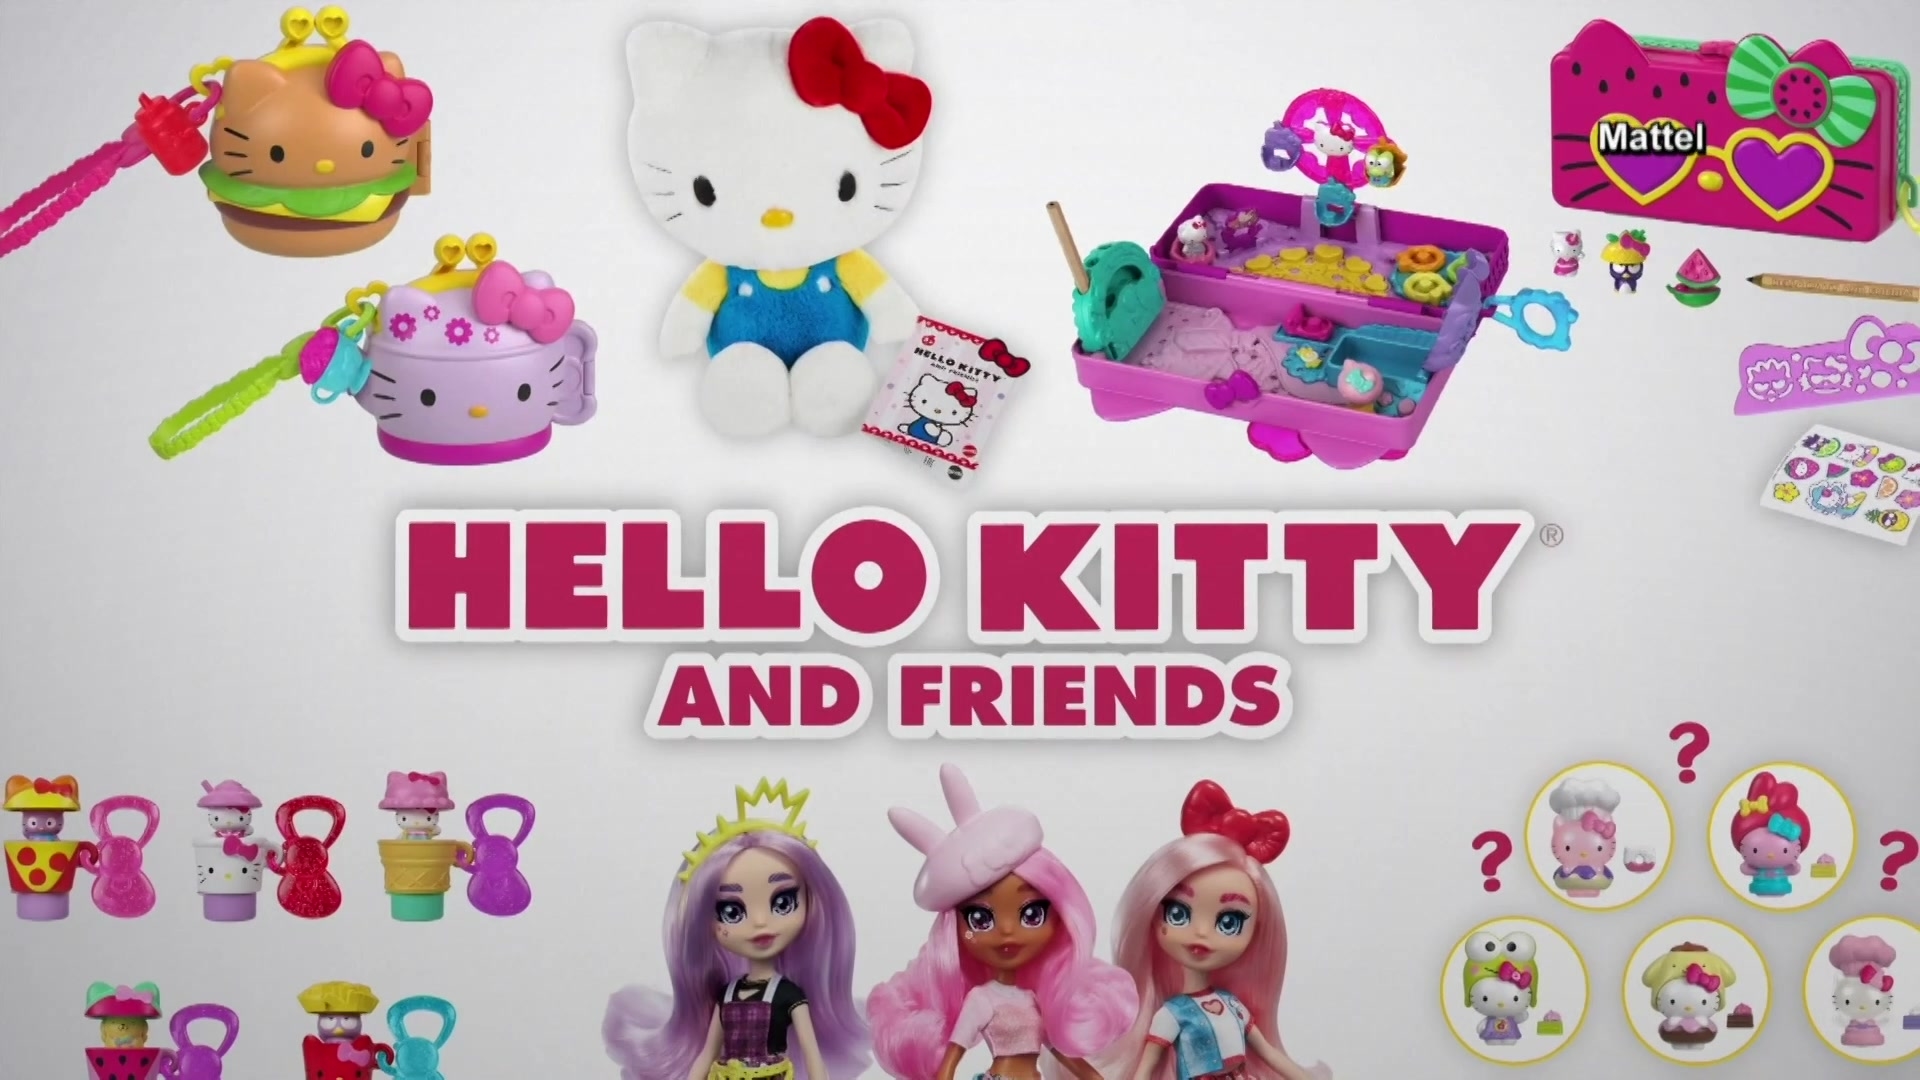 Hello Kitty Island Adventure is full of friendship & fun 💖 Swipe ➡️ to  learn more about some of your favorite friends! ​⁠ ⁠ Play…